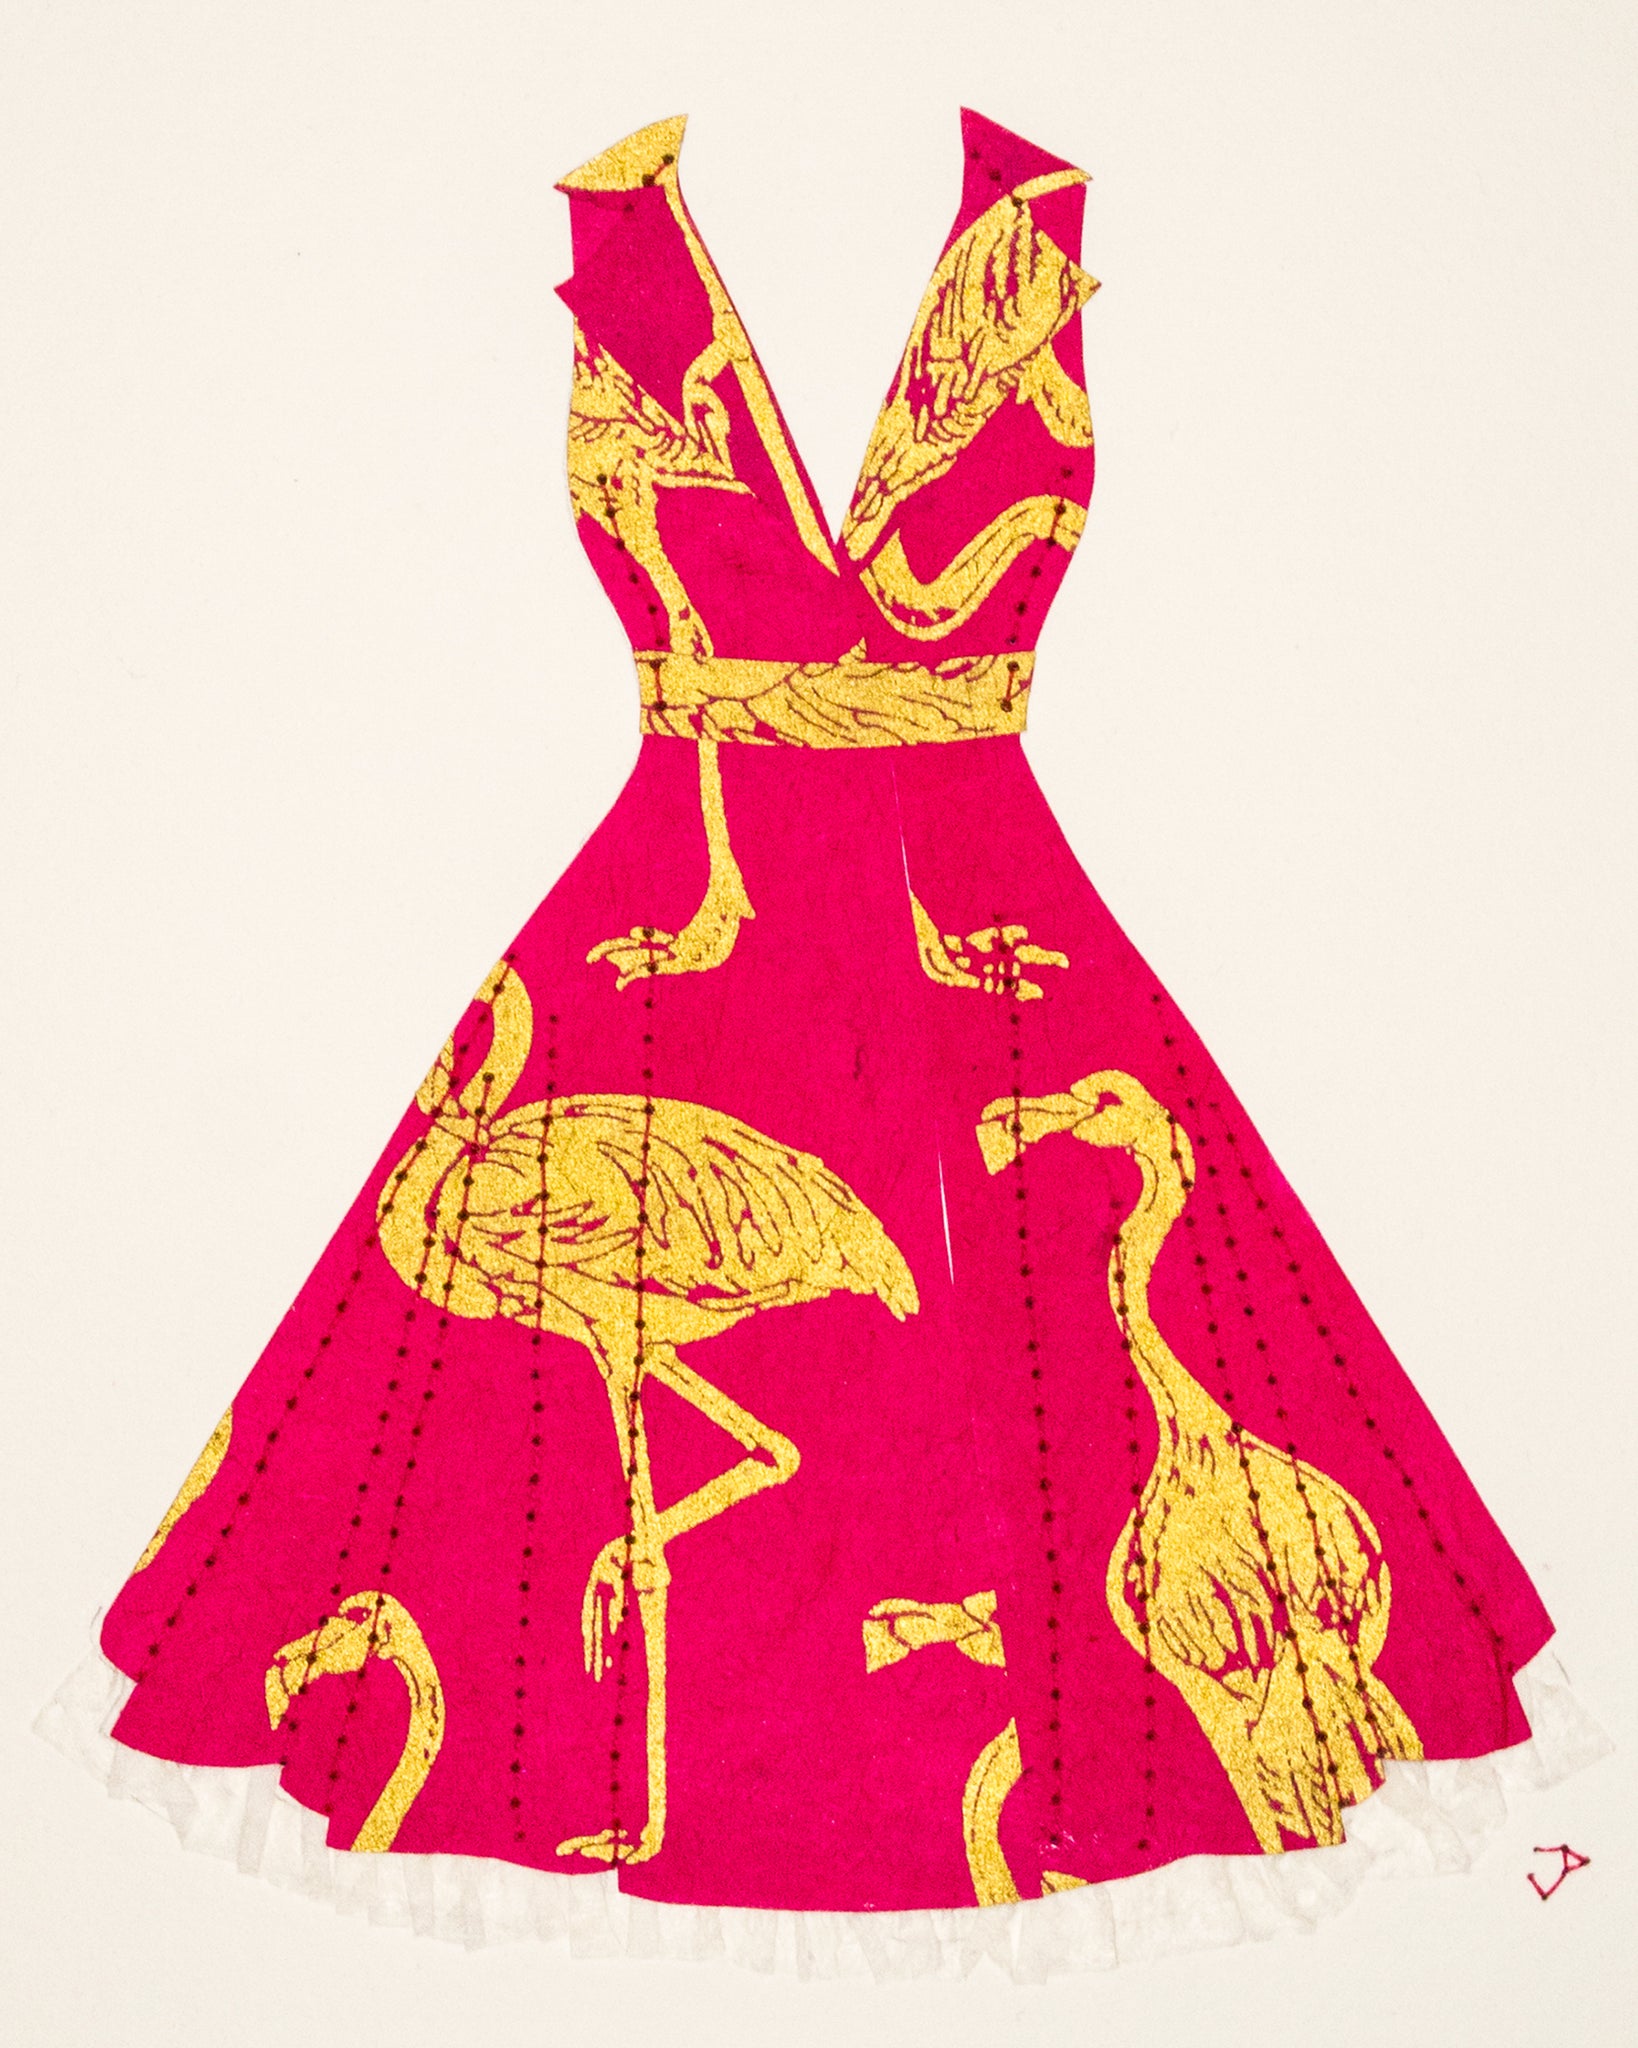 Pinup #031: Pinup dress in pink and gold flamingos with crinoline